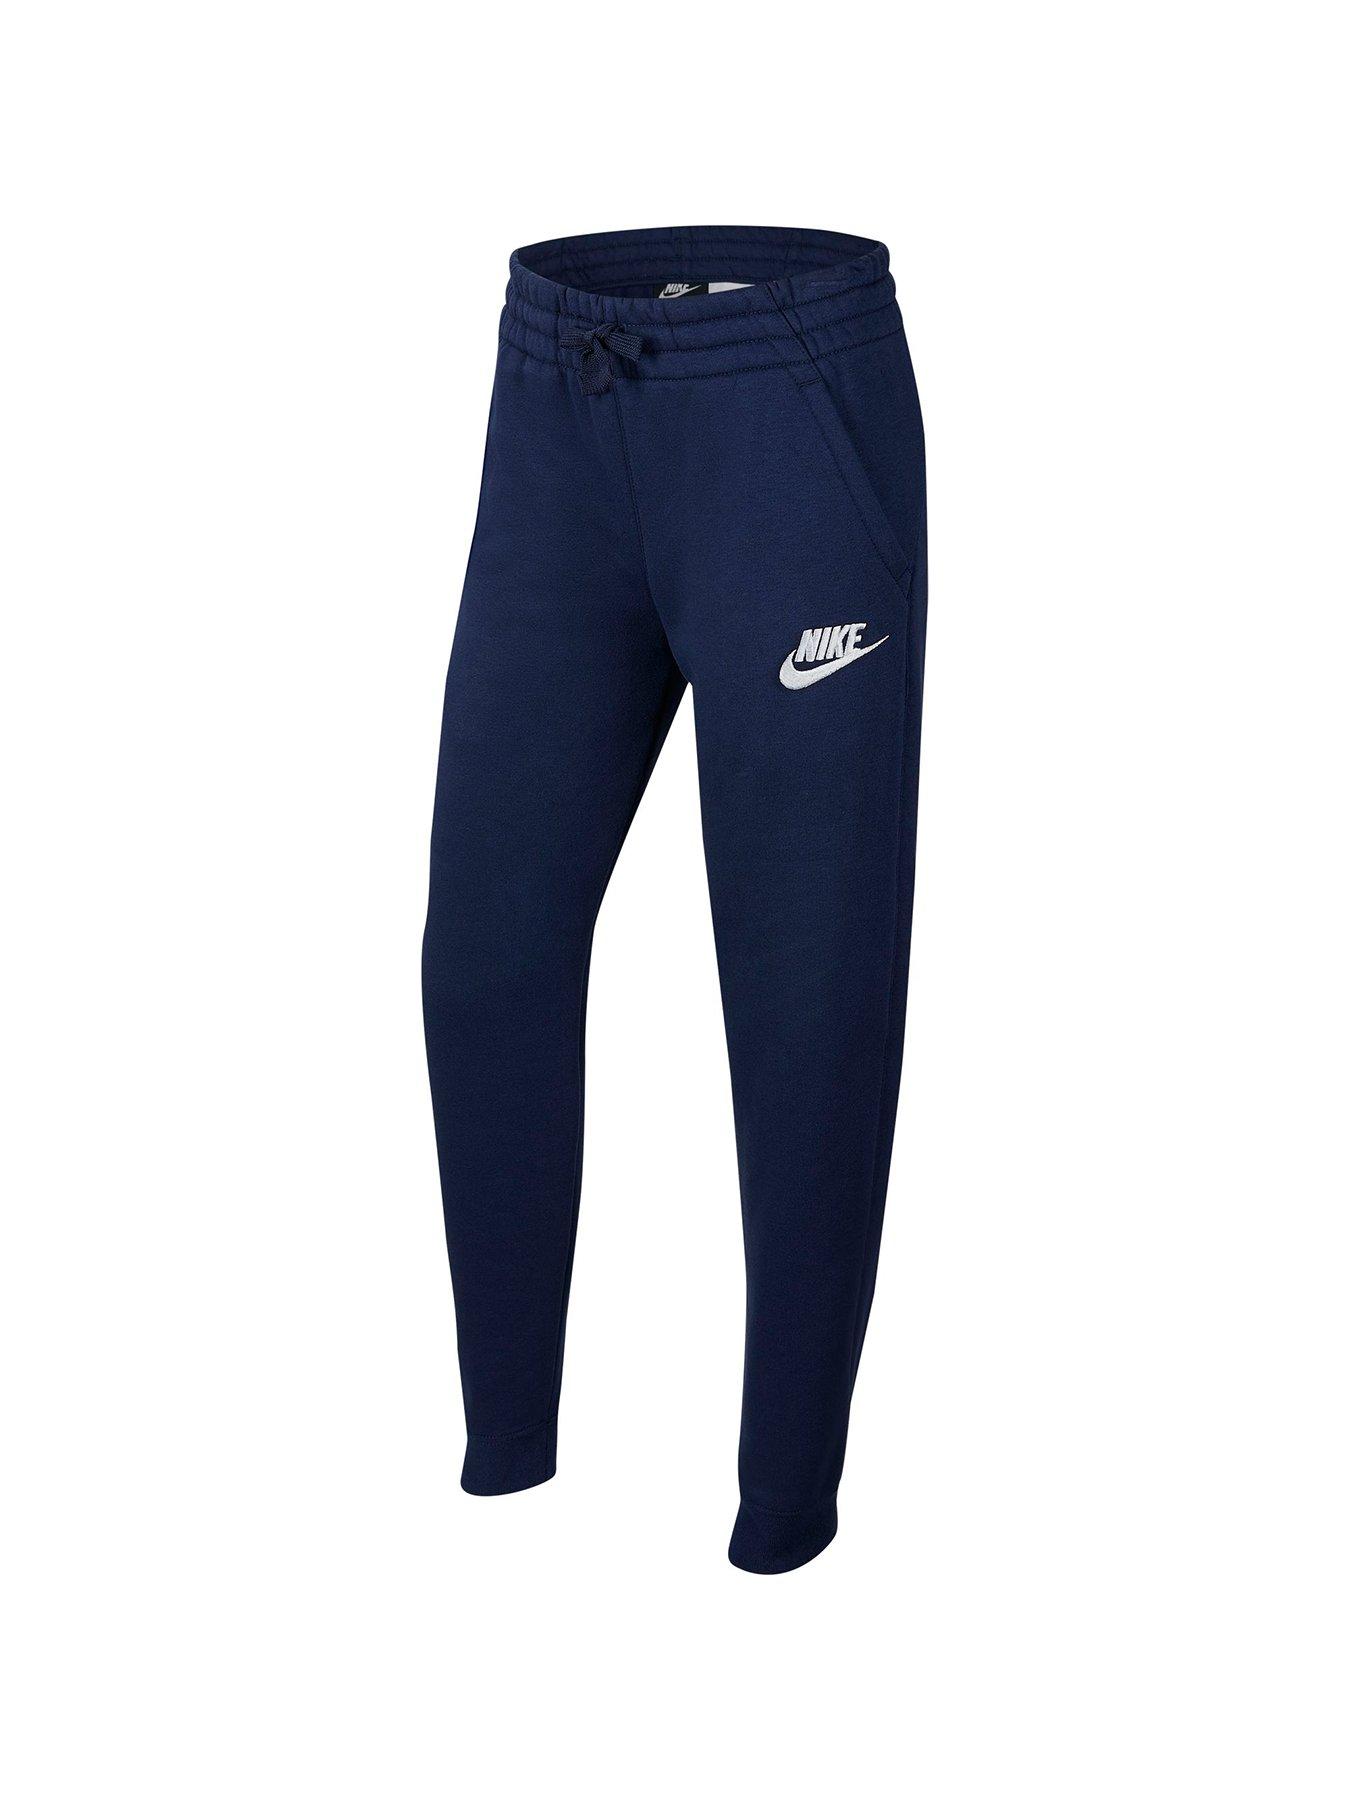 childrens nike tracksuit bottoms